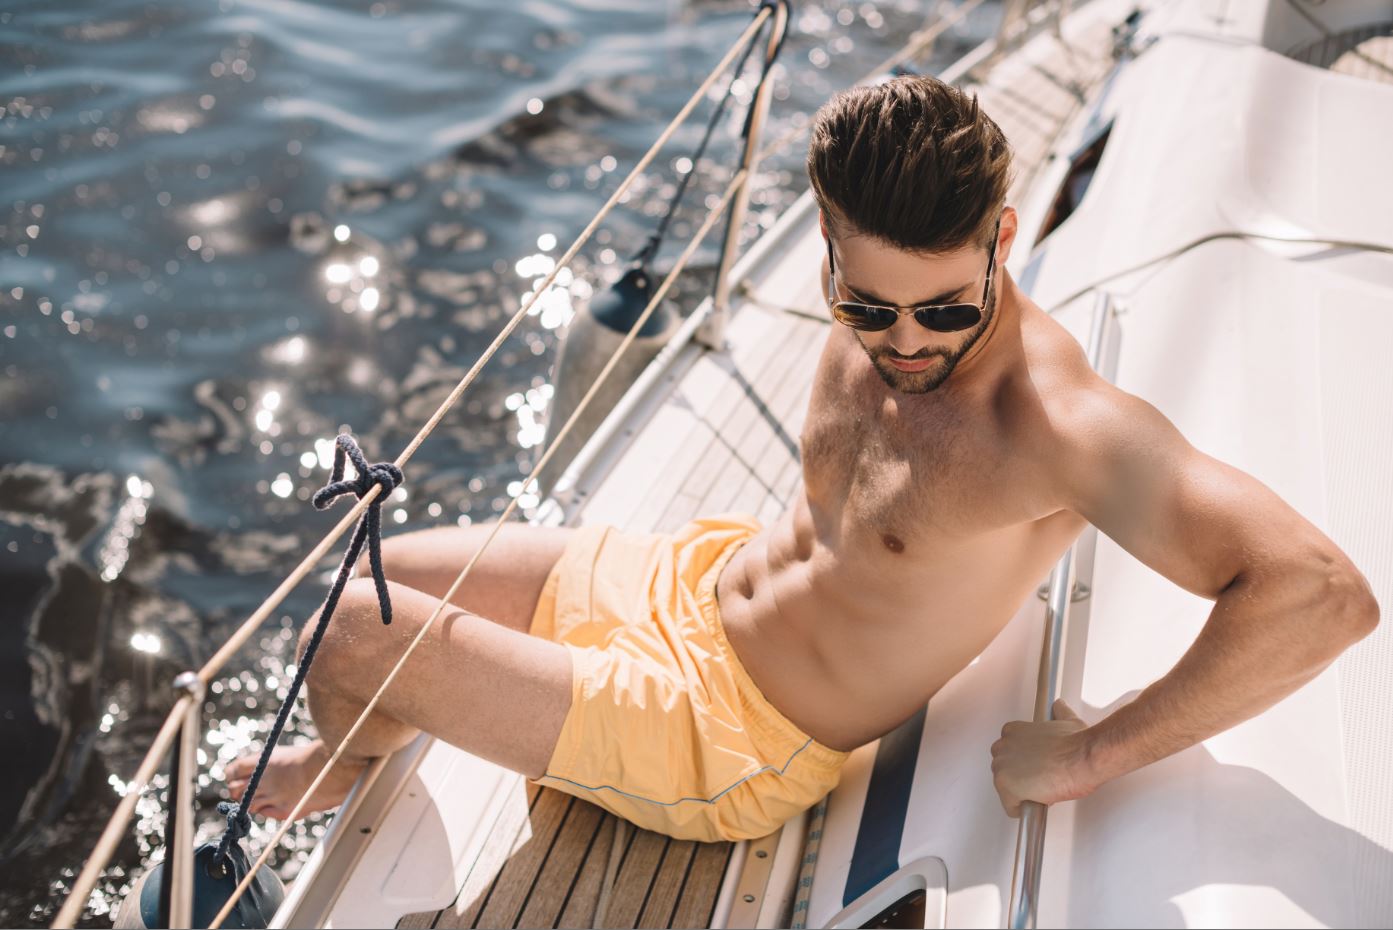 10 Best Men's Swimwear Brands for an Active Lifestyle